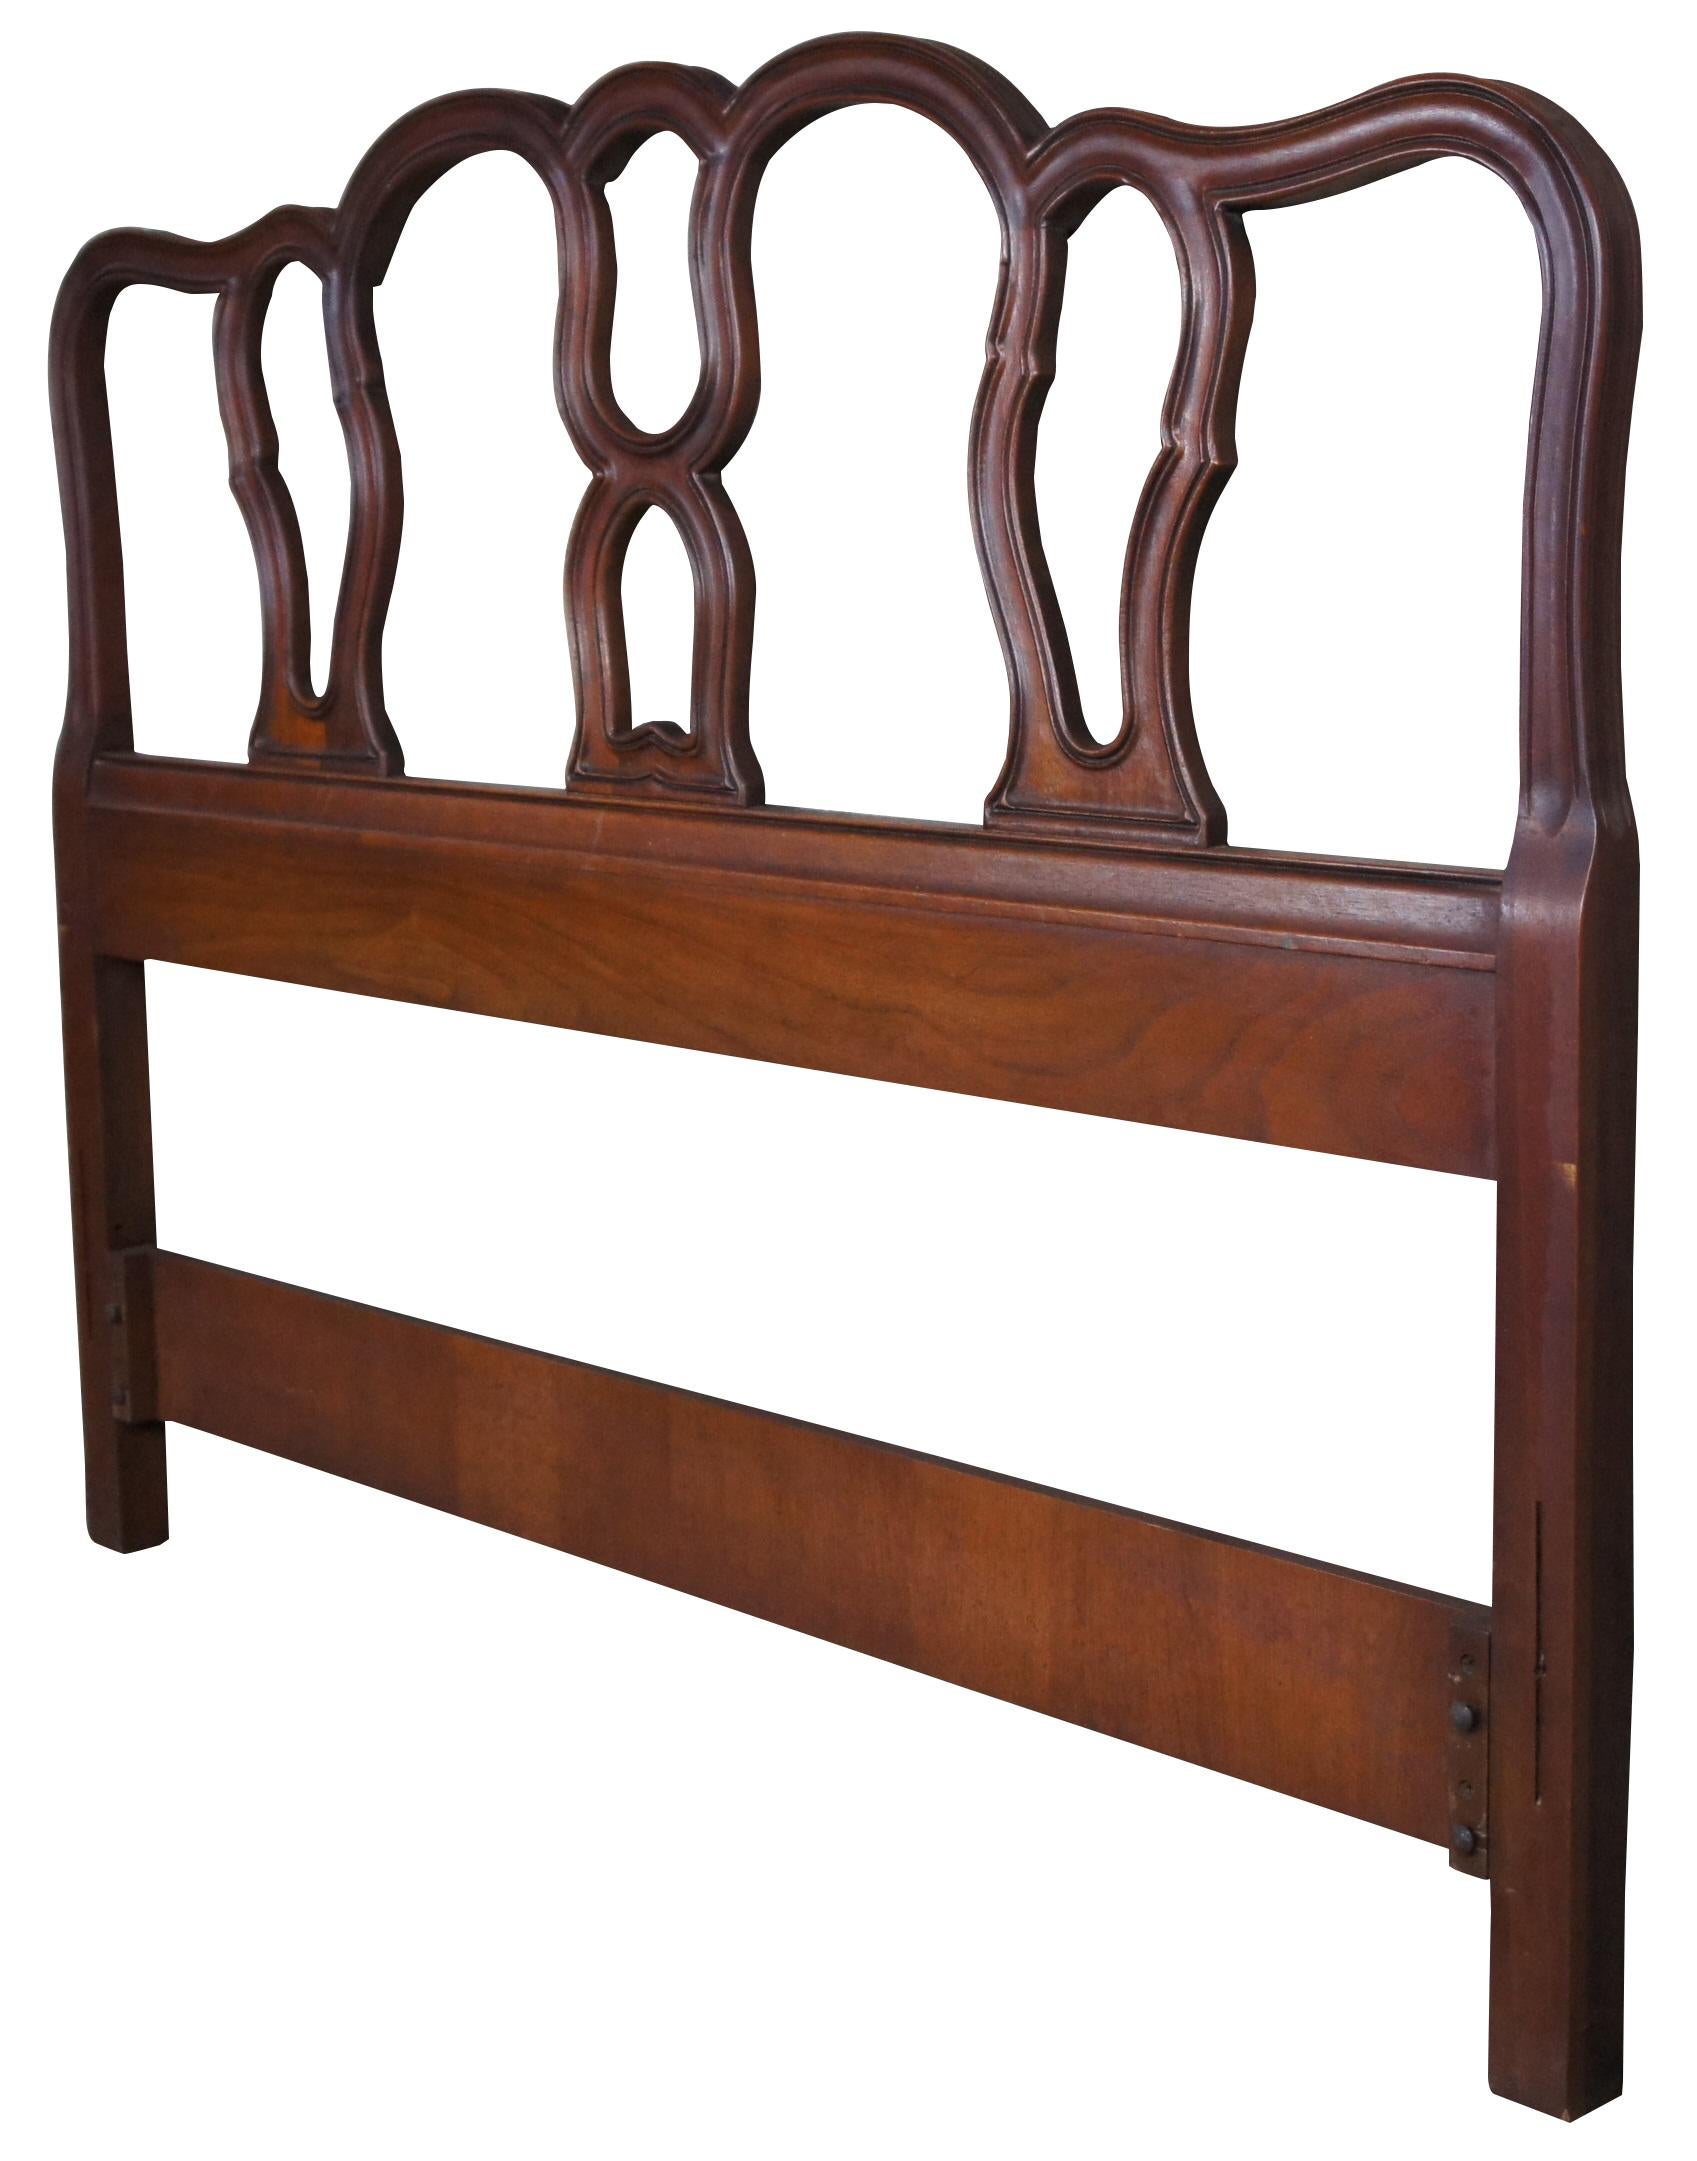 1966 mid century Drexel Bordeaux French Provincial full size bed headboard. Made from walnut with a serpentine form and pierced back. 206-540. Measure: 57